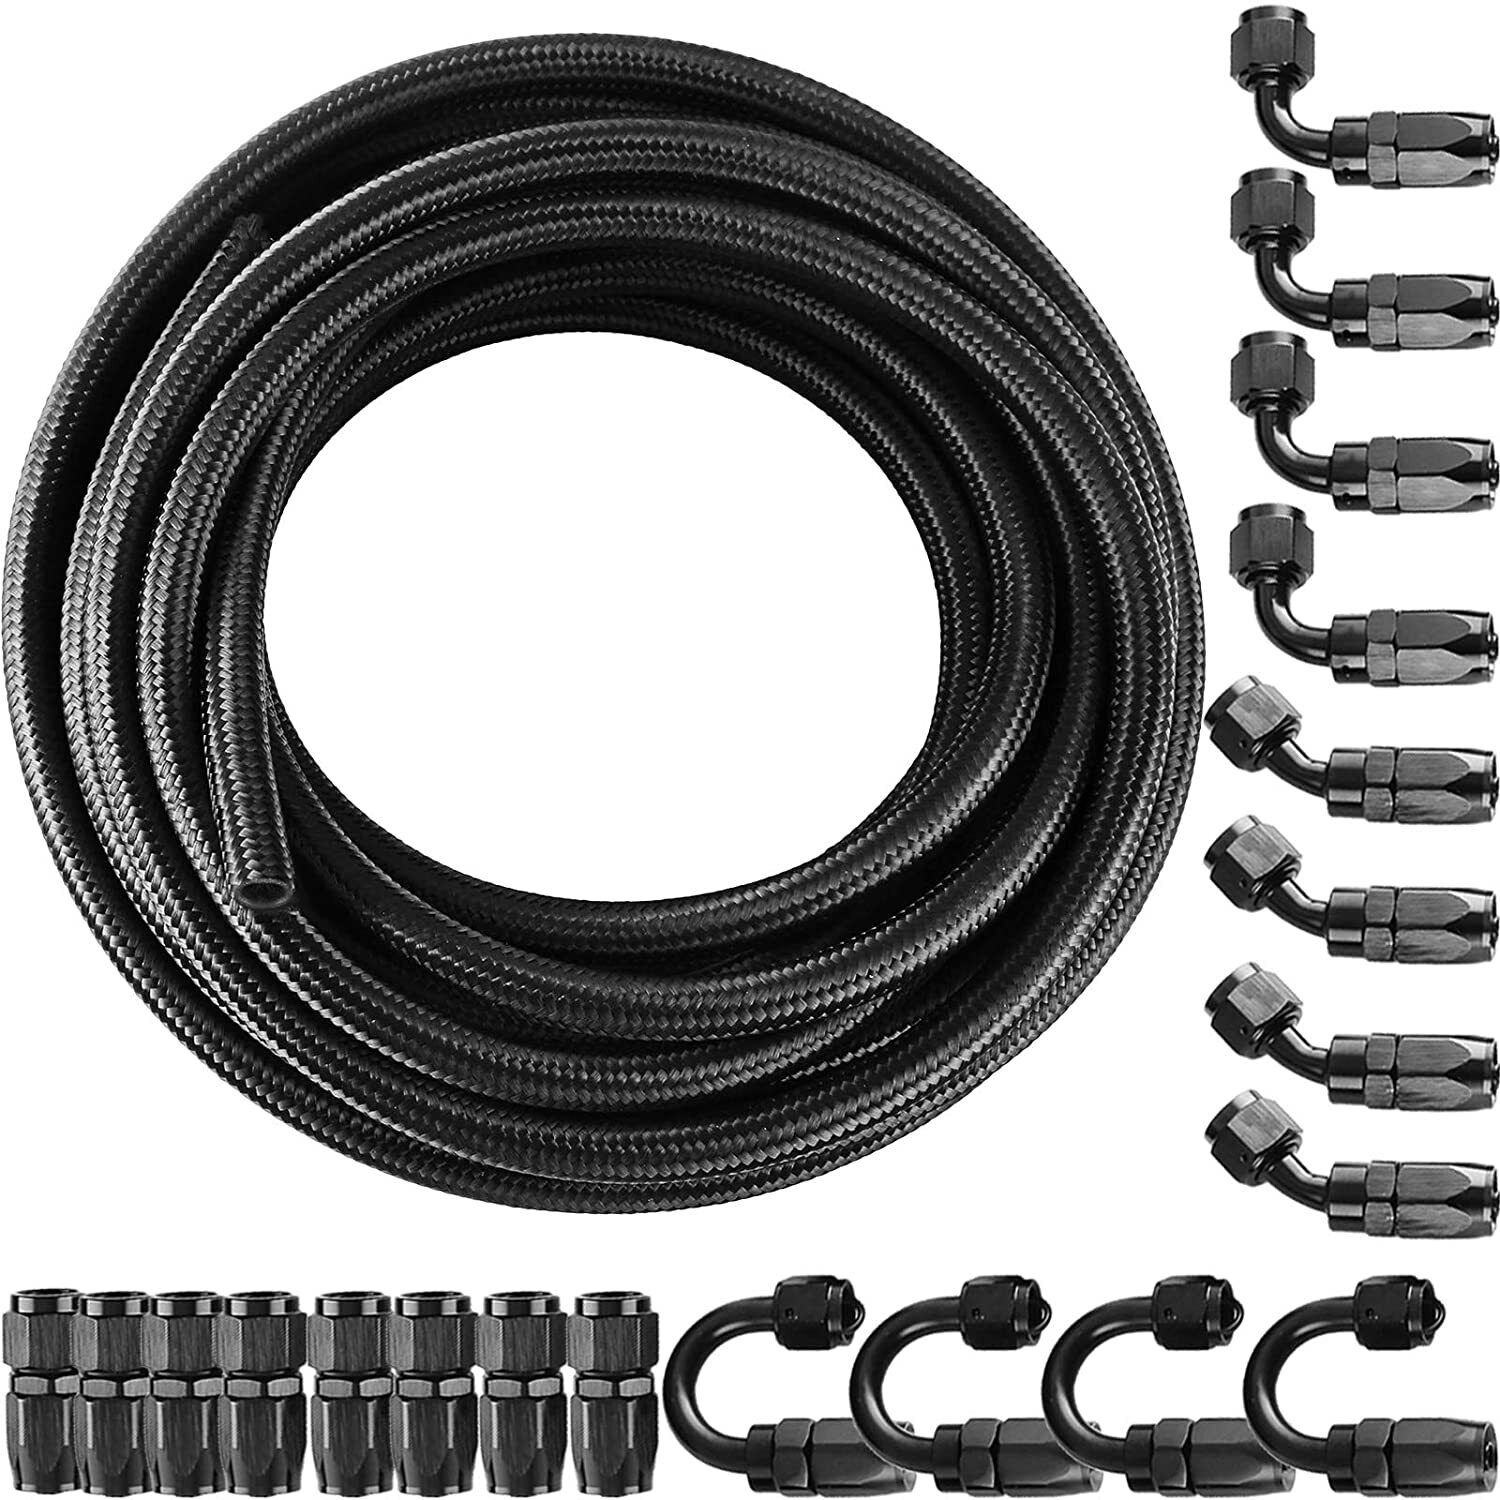 33FT -8AN AN-8 AN8 Fitting Stainless Steel Nylon Braided Fuel Oil Hose Line Kit